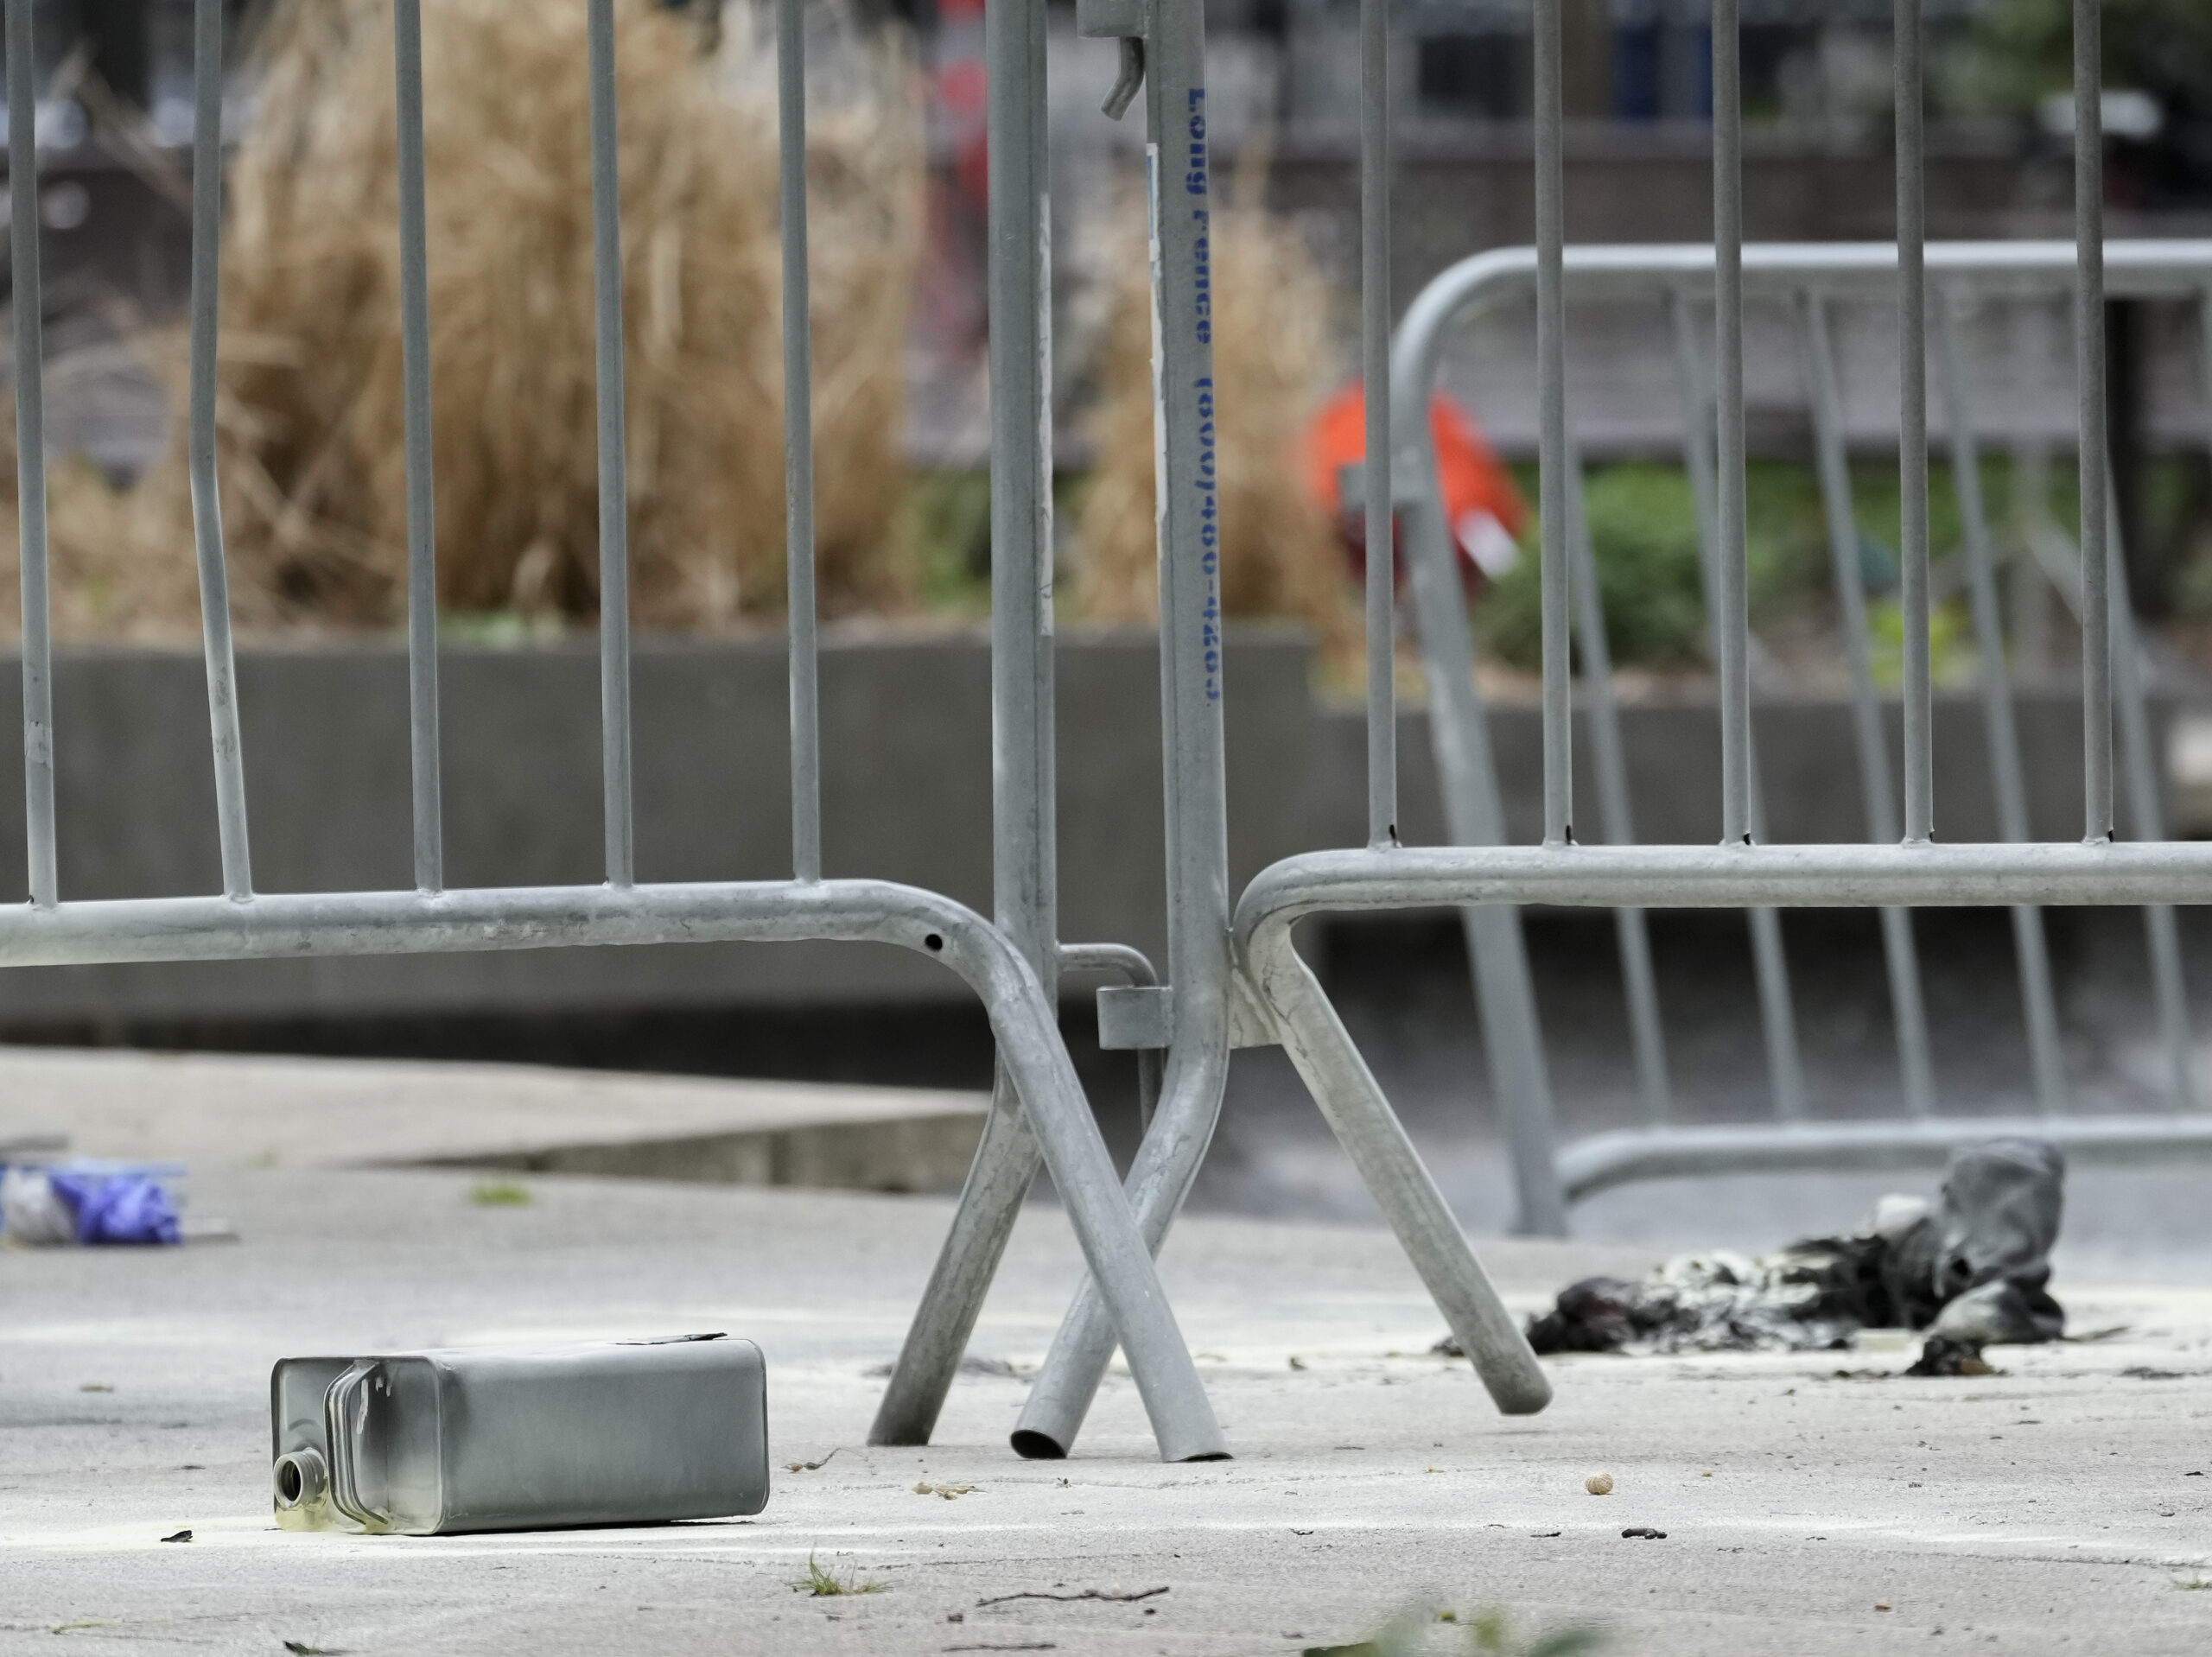 A metal can sits on the ground at the scene where a man lit himself on fire in a park outside Manhattan criminal court on Friday in New York.